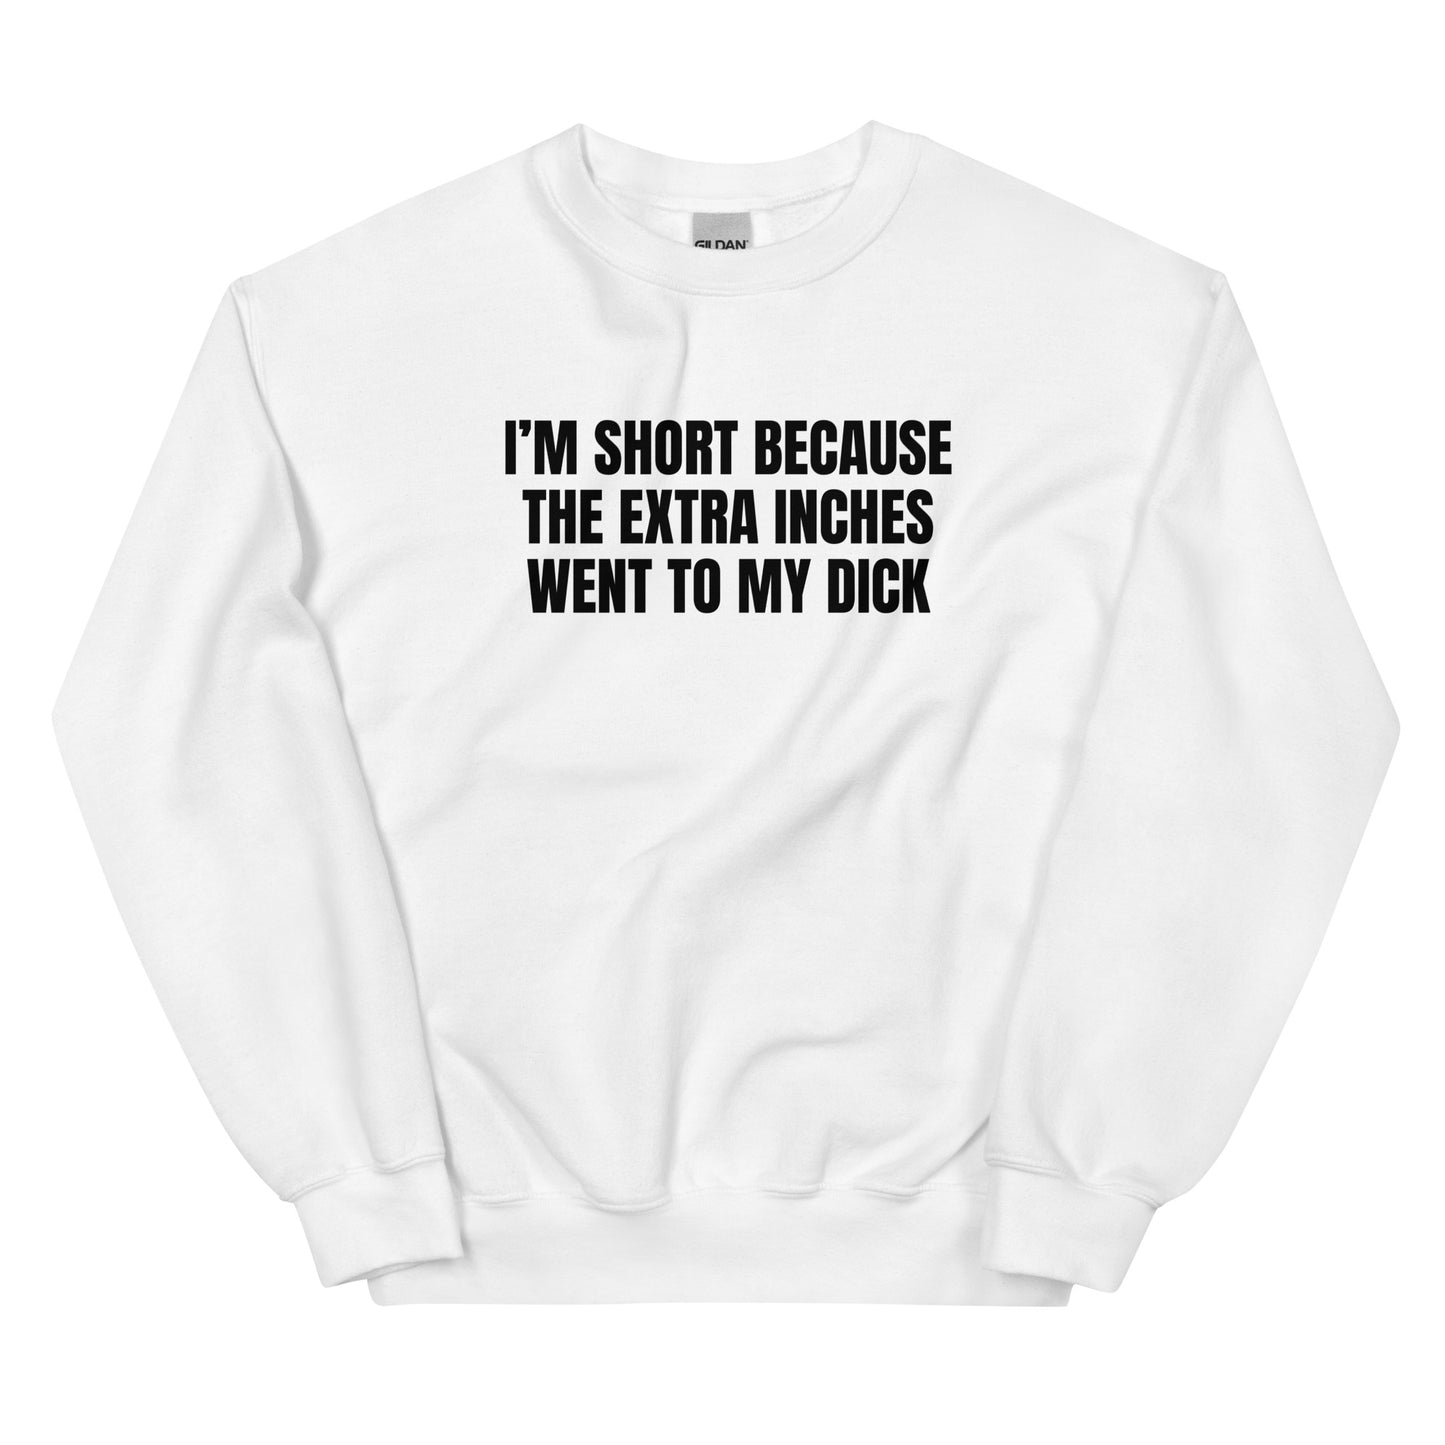 I'm Short Because the Extra Inches Went to My Dick Unisex Sweatshirt